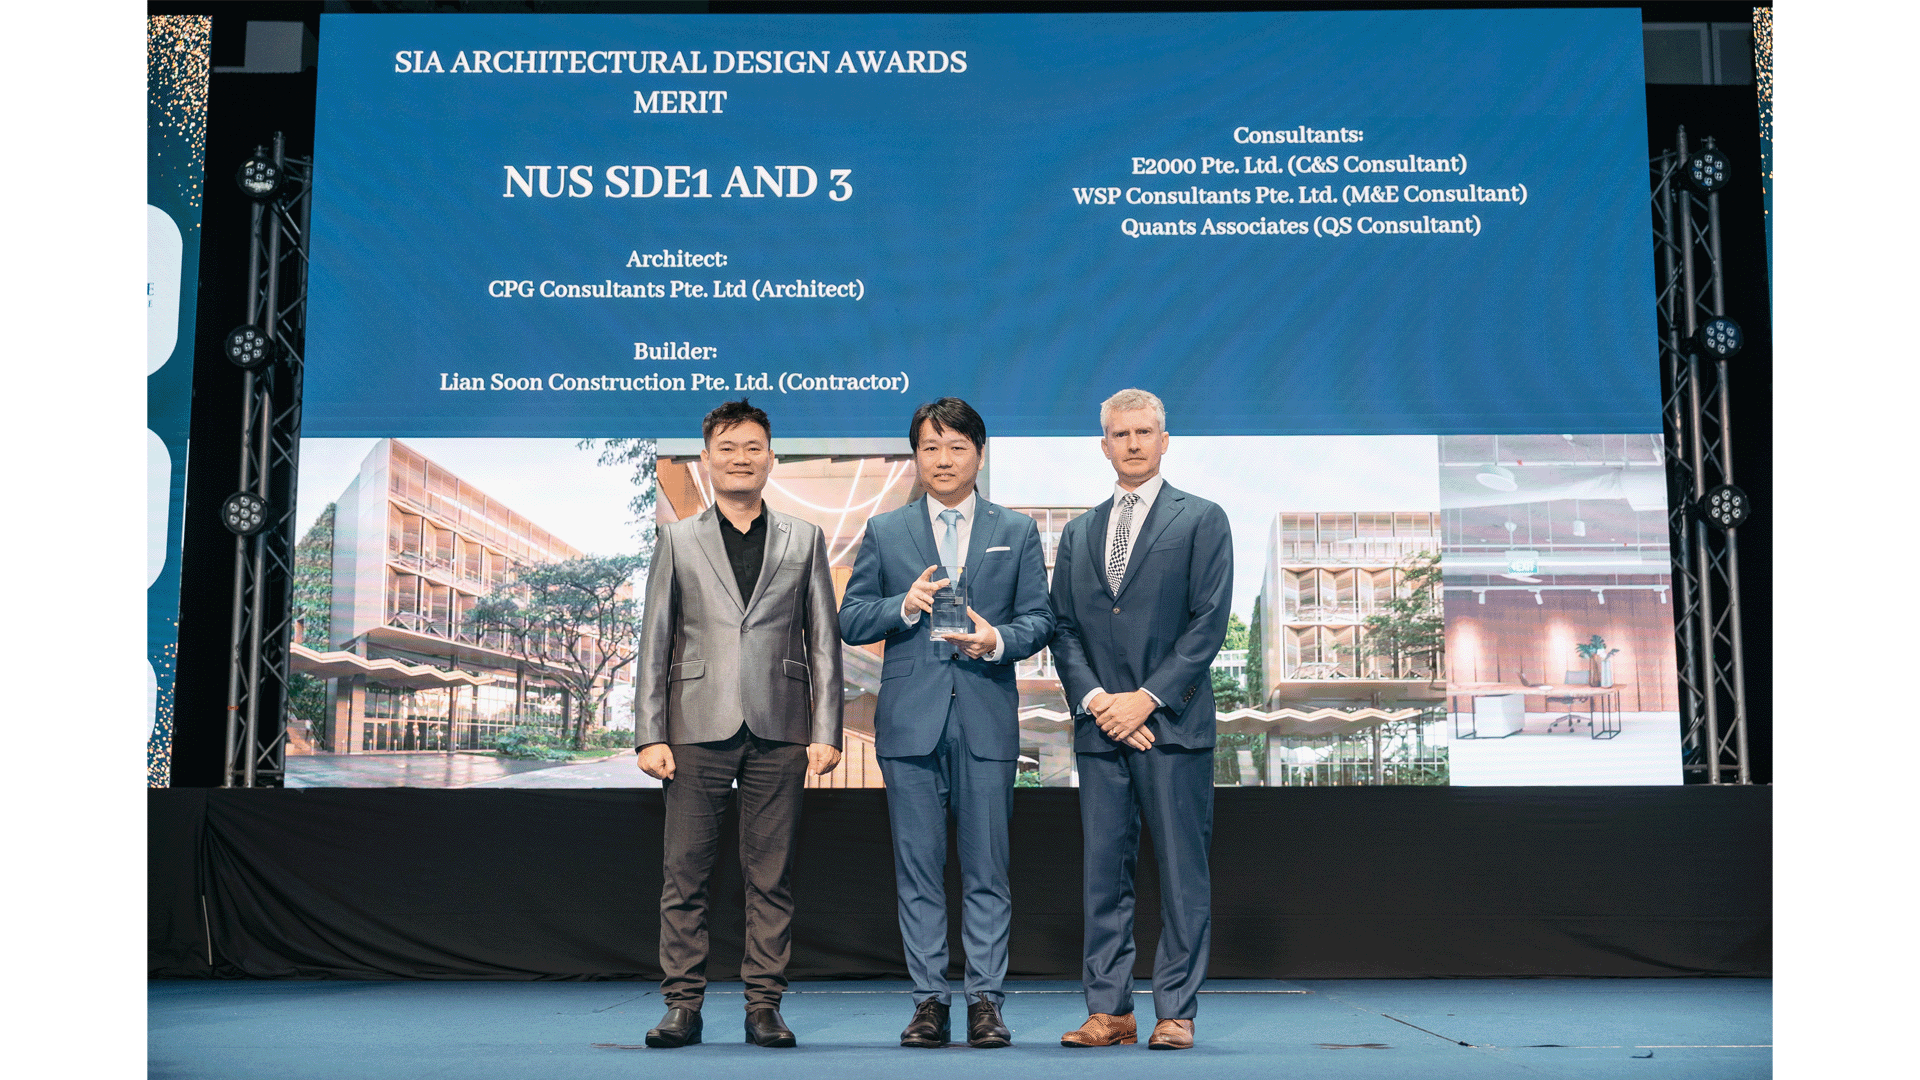 The award was presented to leaders of the project team at the SIA's annual dinner.